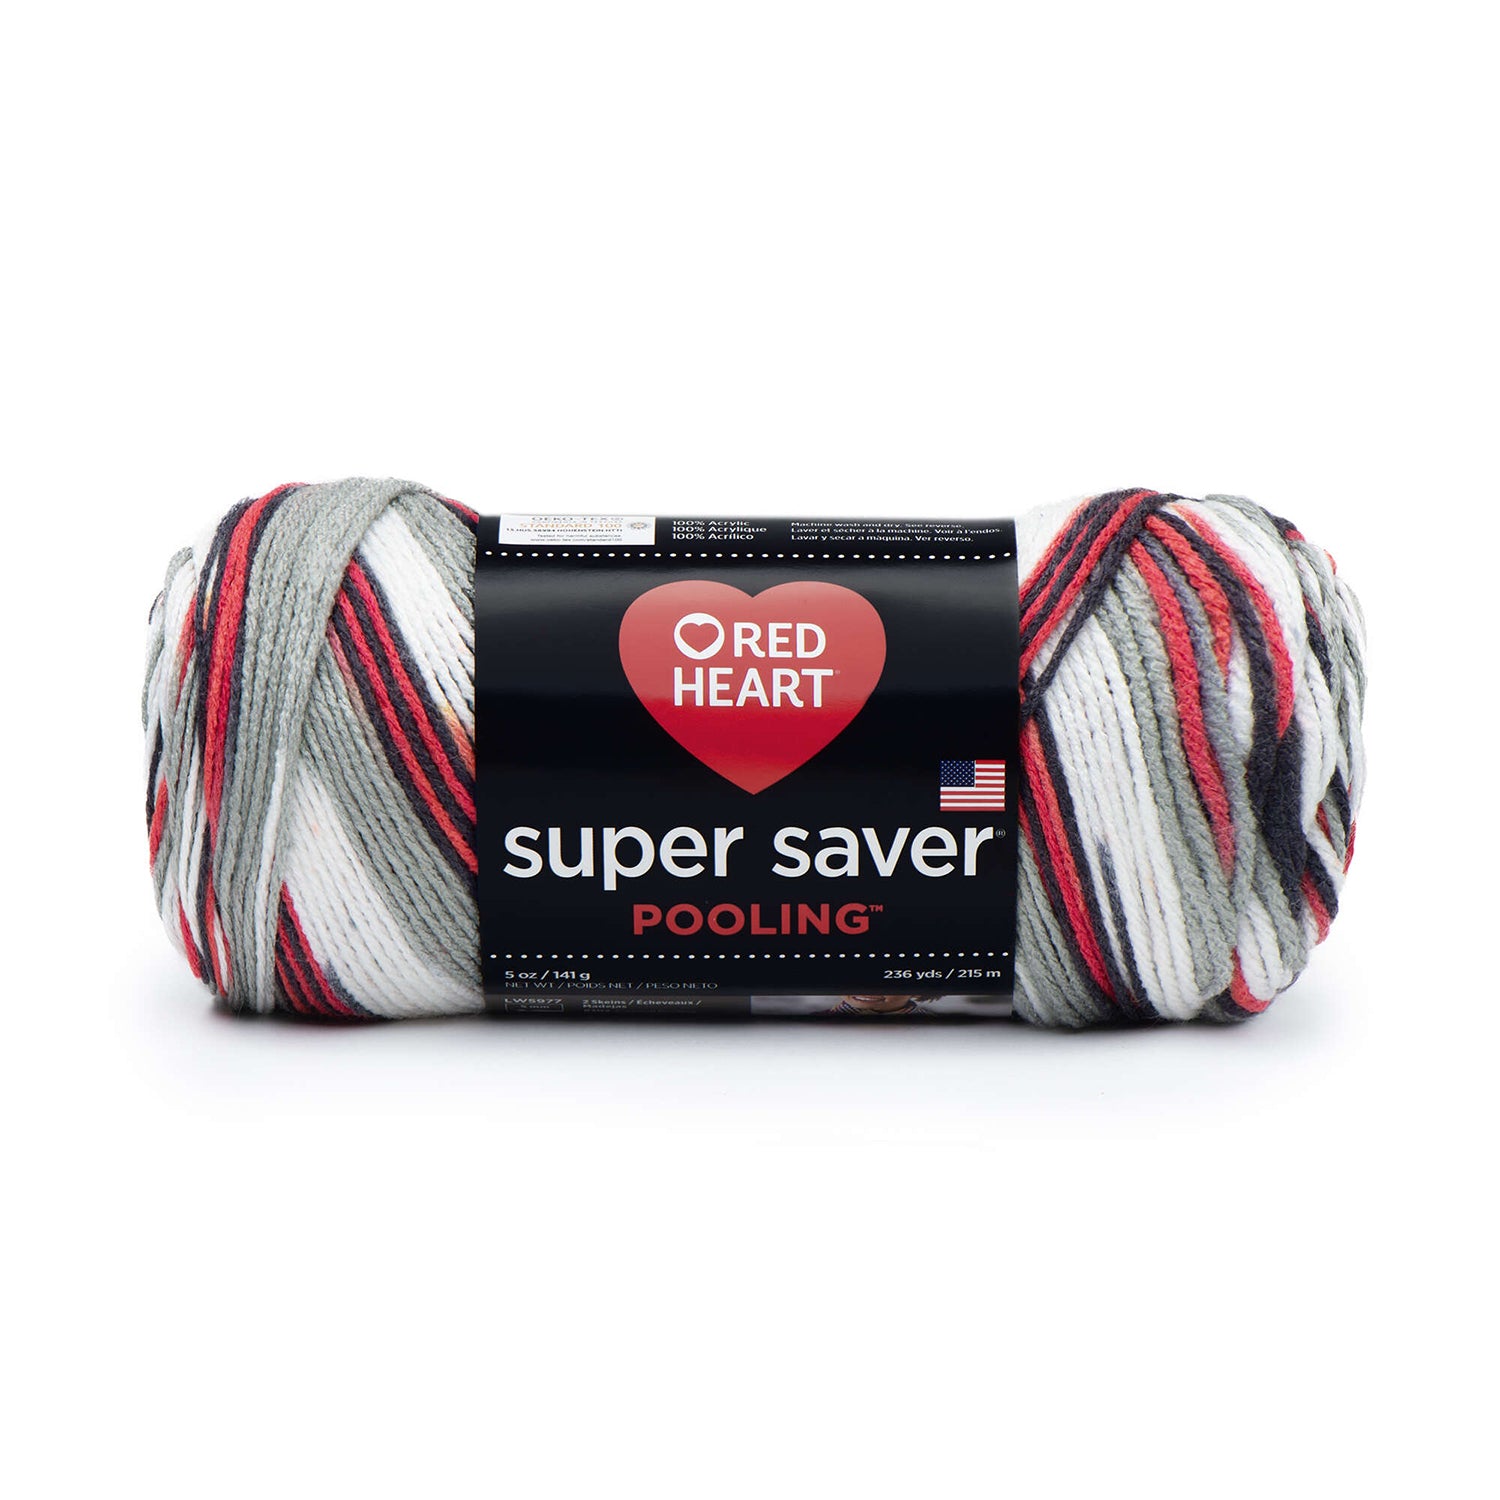 Red Heart Yarn Super Saver Pooling Yarn E300P – Good's Store Online